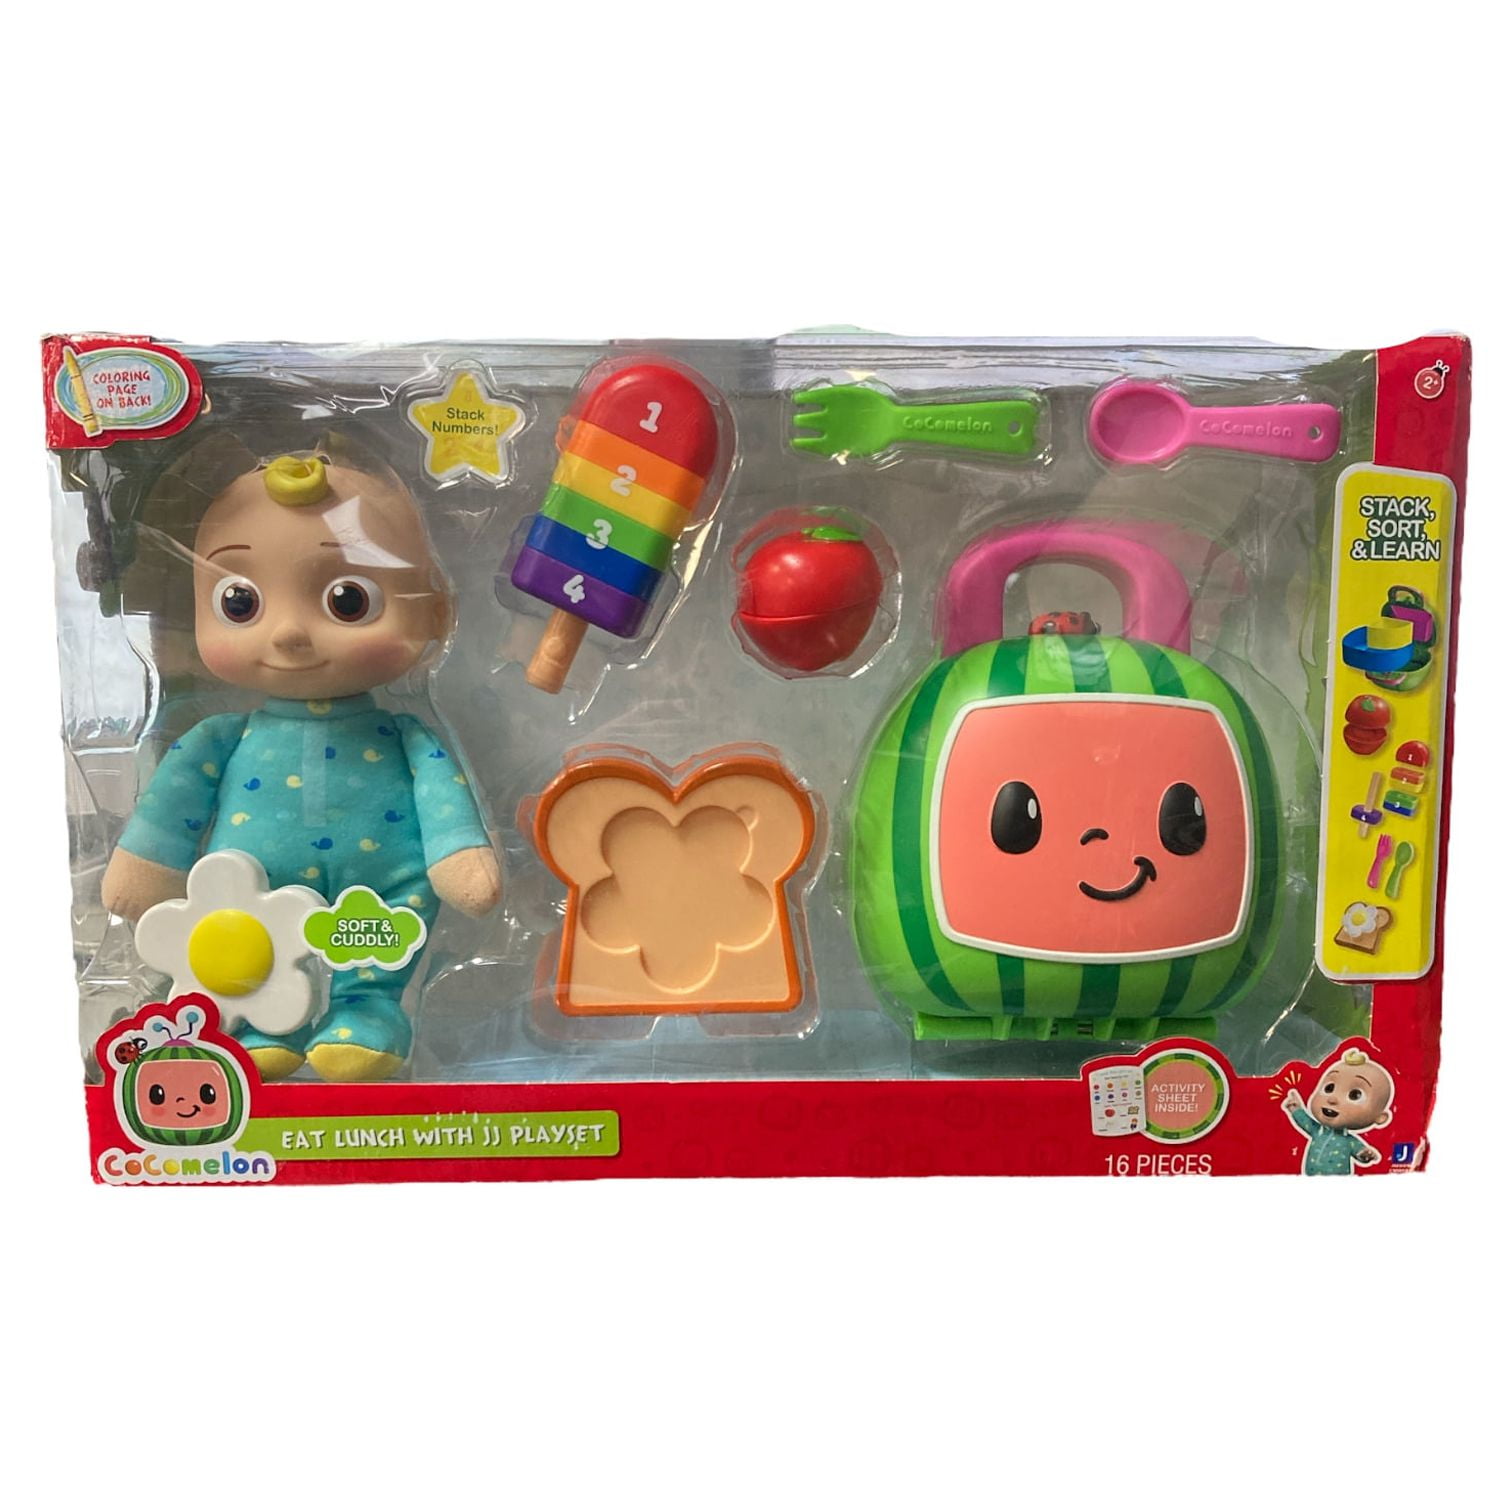 CoComelon Lunchbox Playset - Includes Lunchbox, 3-Piece Tray, Fork, Spoon,  Toast with Egg, Apple, Popsicle, Activity Card - Toys for Kids, Toddlers,  and Preschoolers 